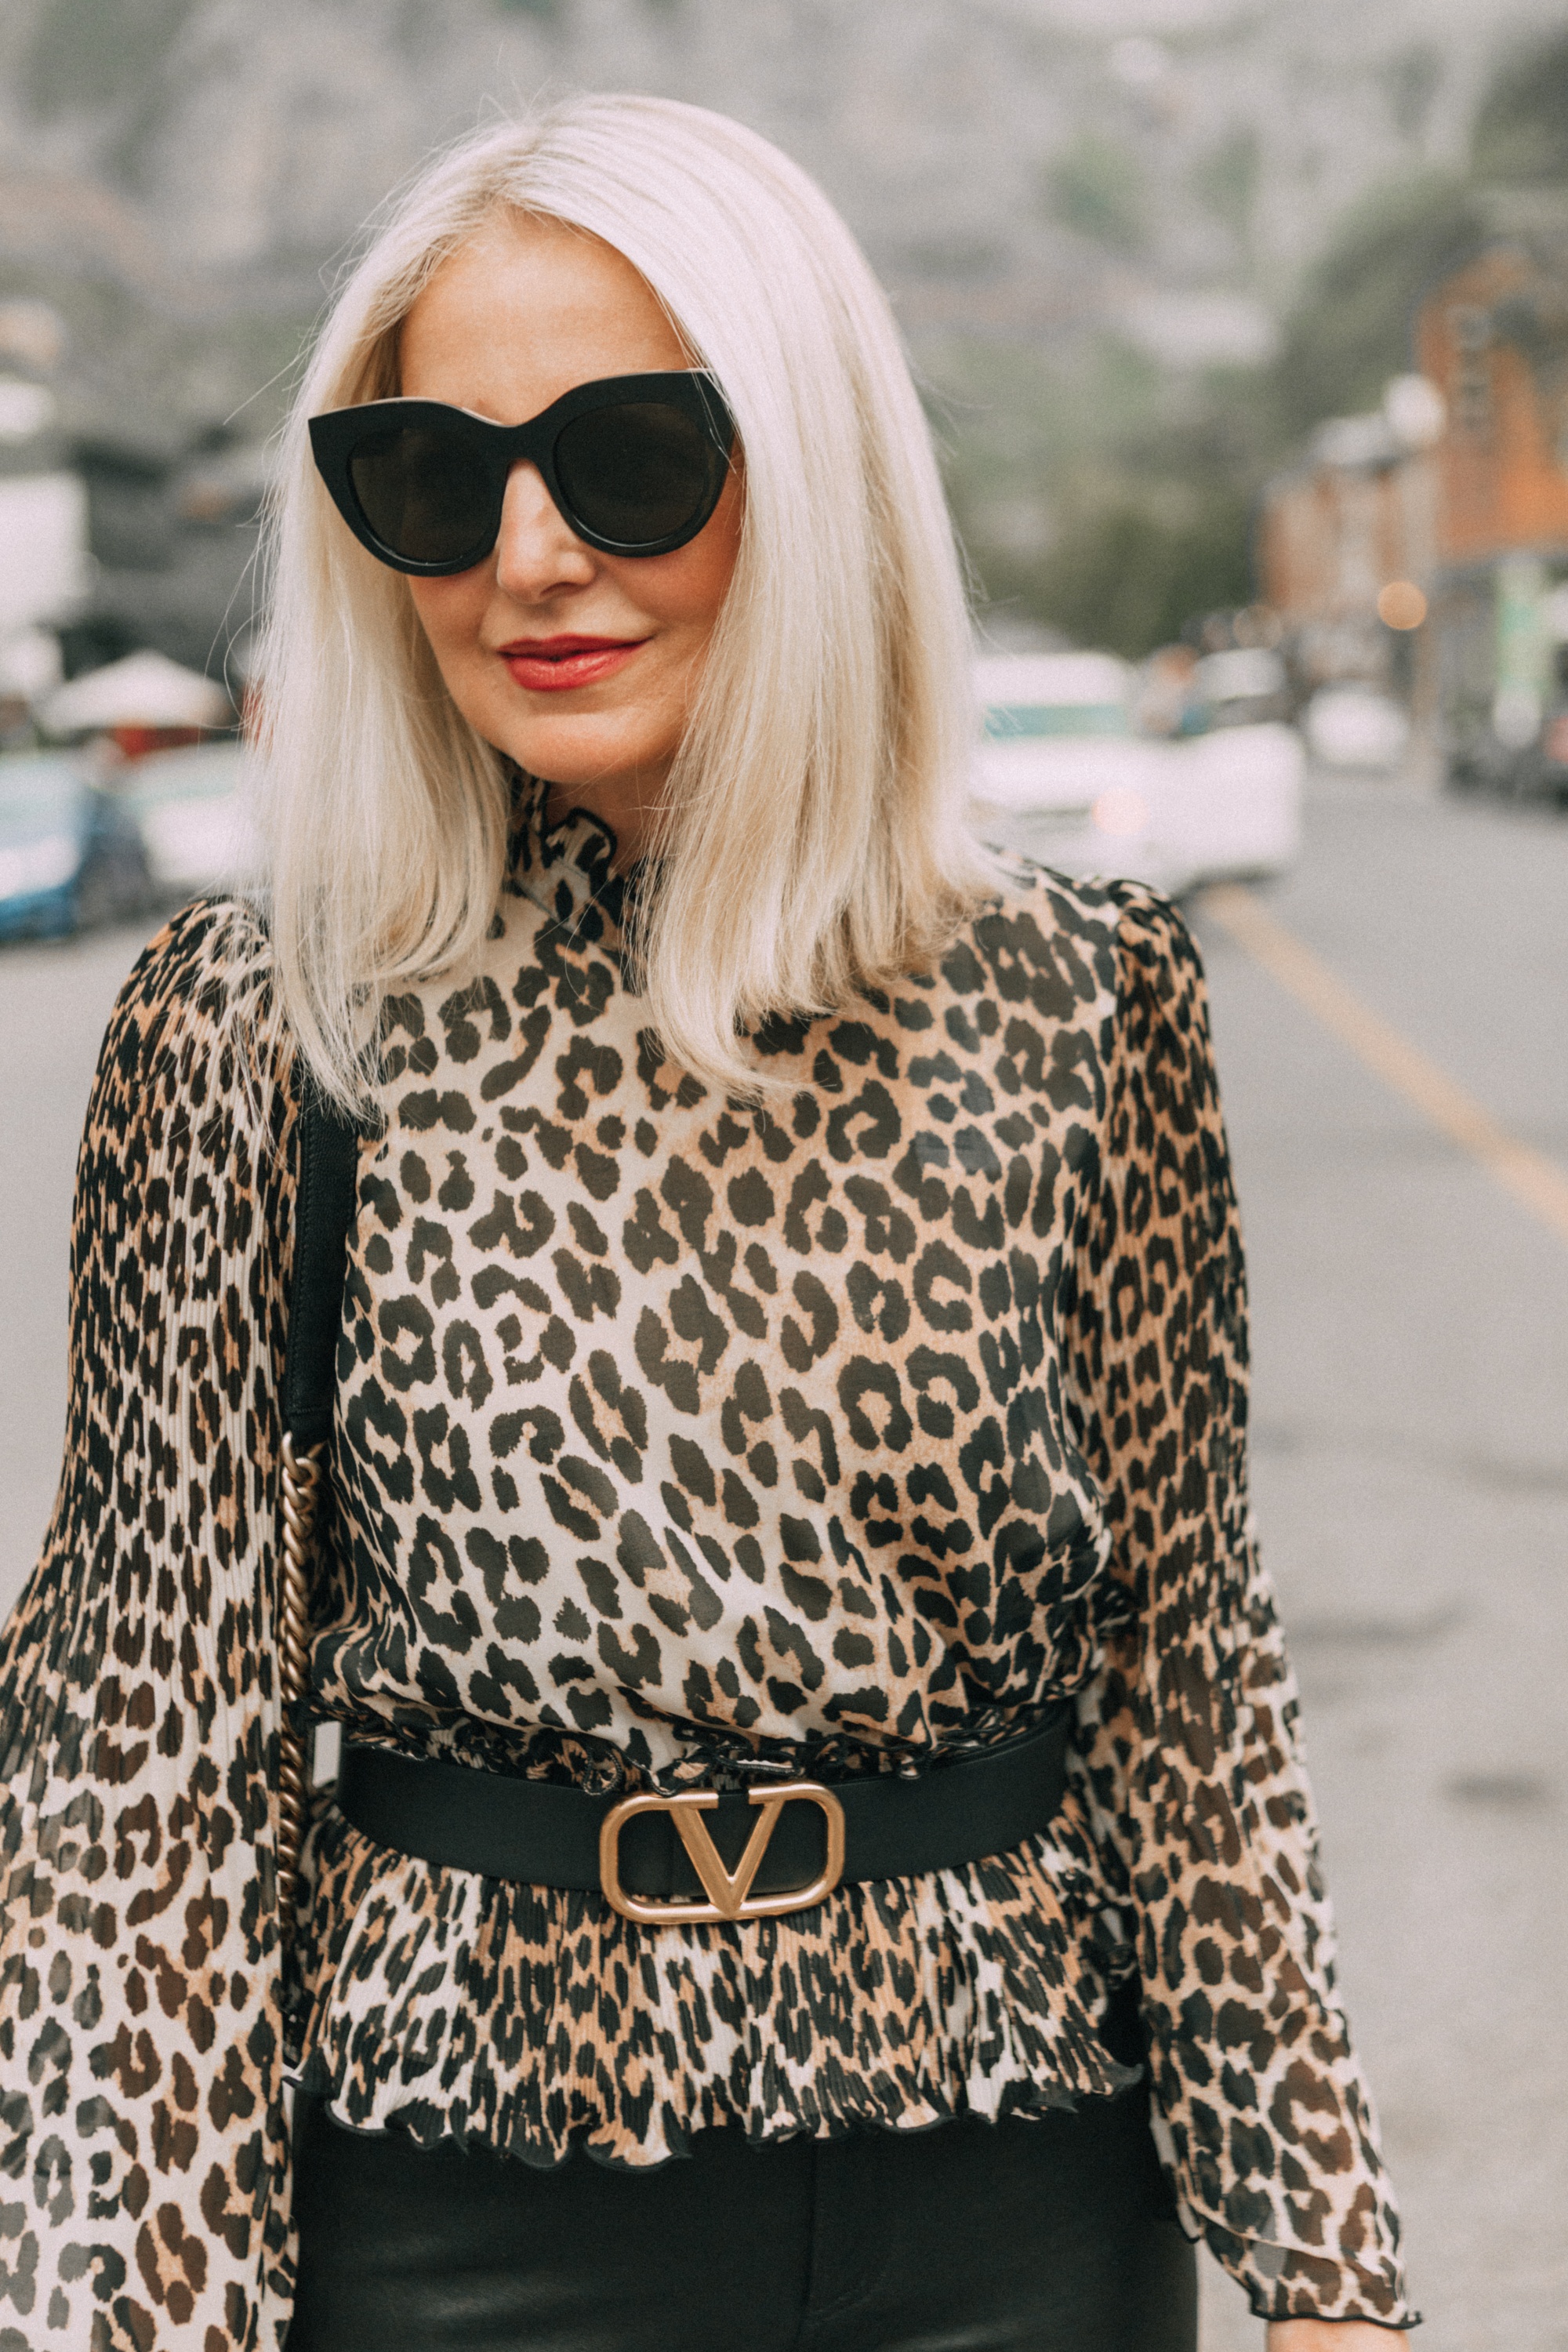 accessory basics like a reversible belt are a must have! featuring the Valentino belt with a Ganni leopard print blouse